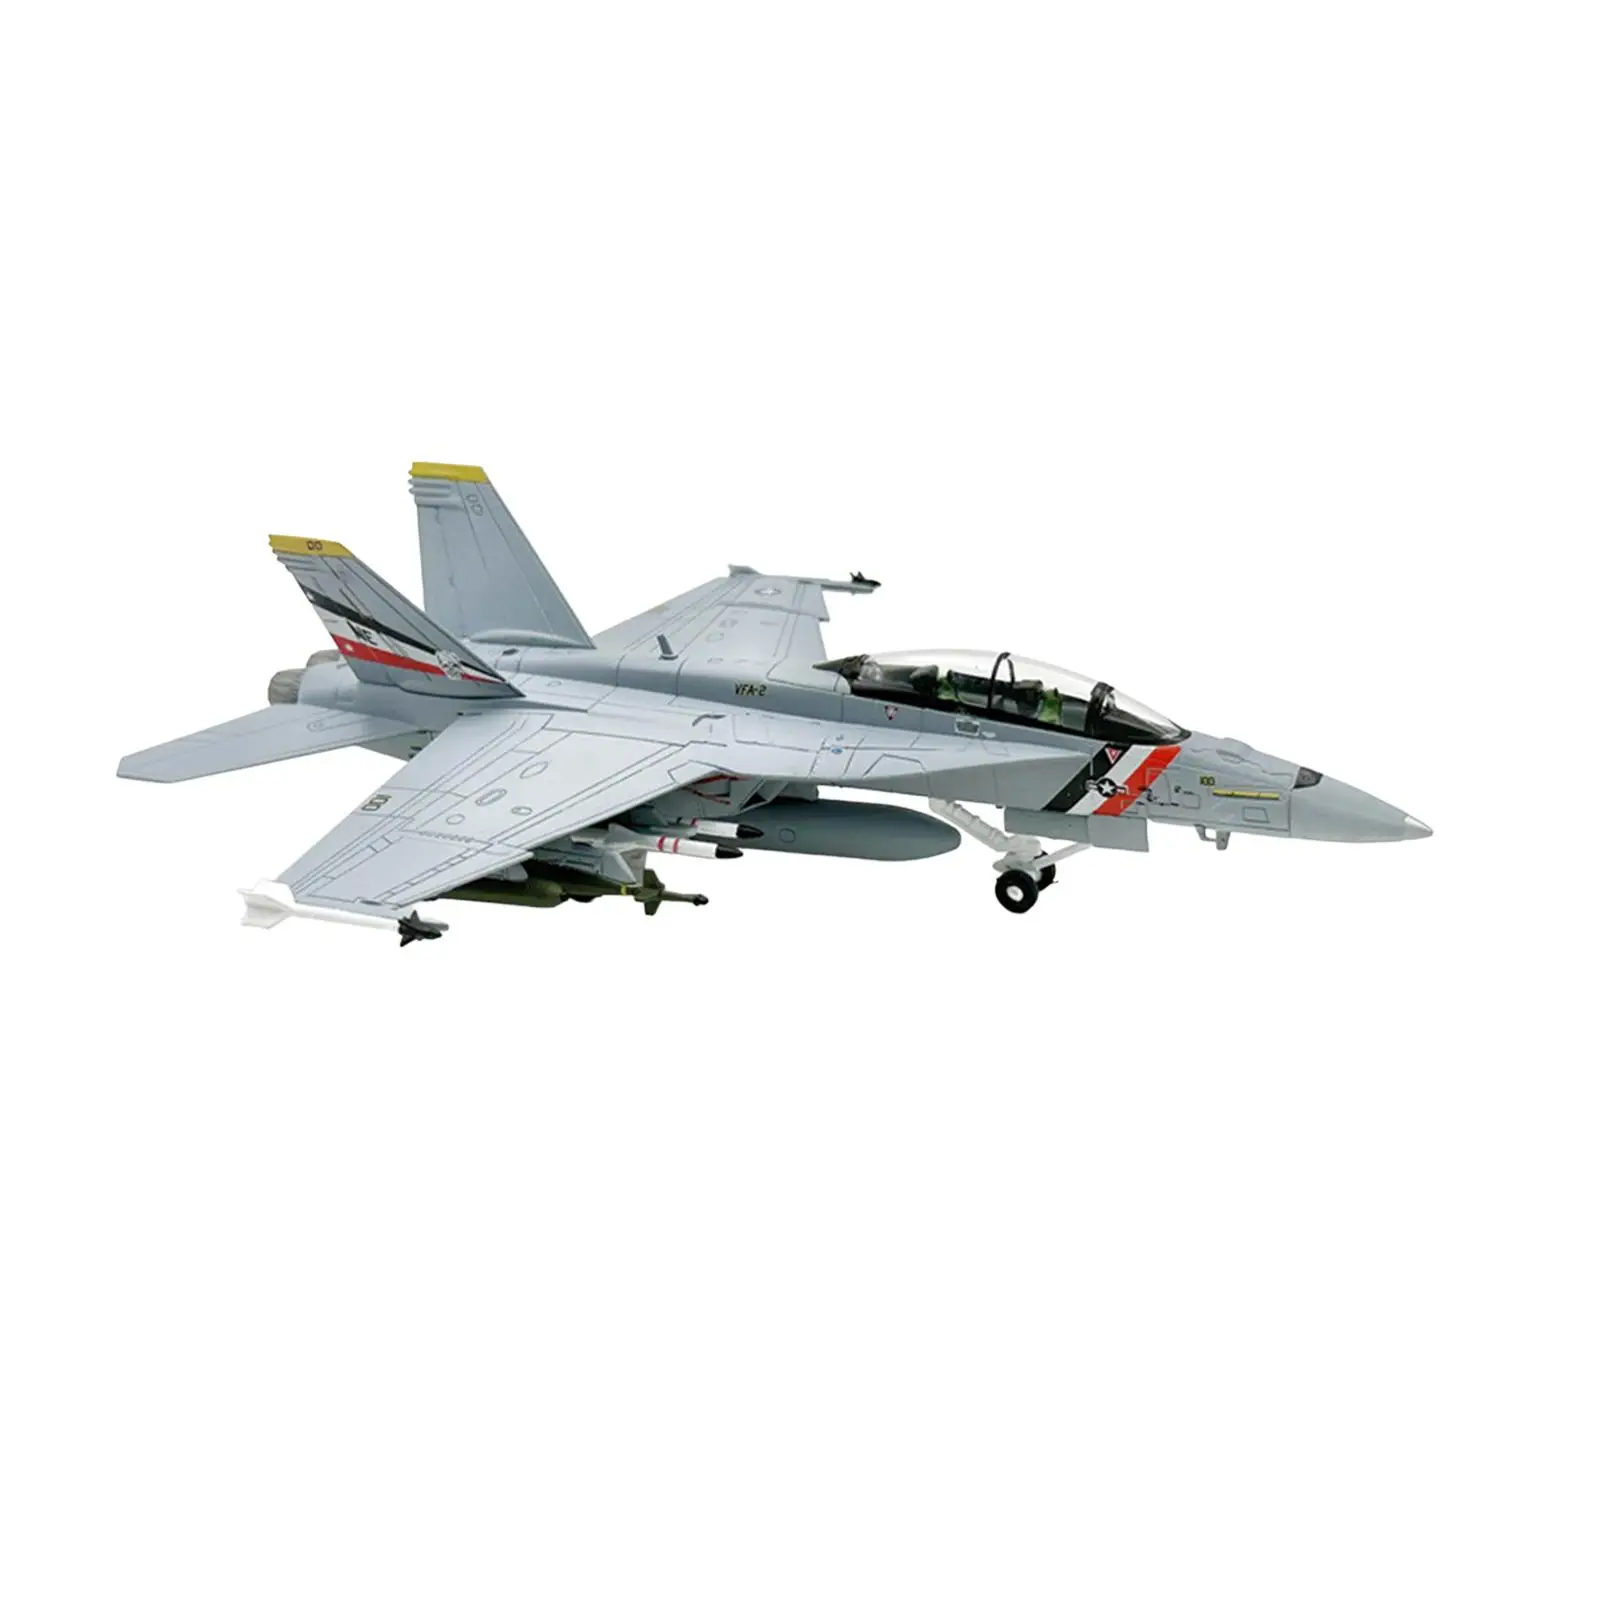 

Diecast Alloy Model 1:100 Jet Aircraft Fighter Ornament Airplane with Stand for Bookshelf Home Cafes Office Bedroom